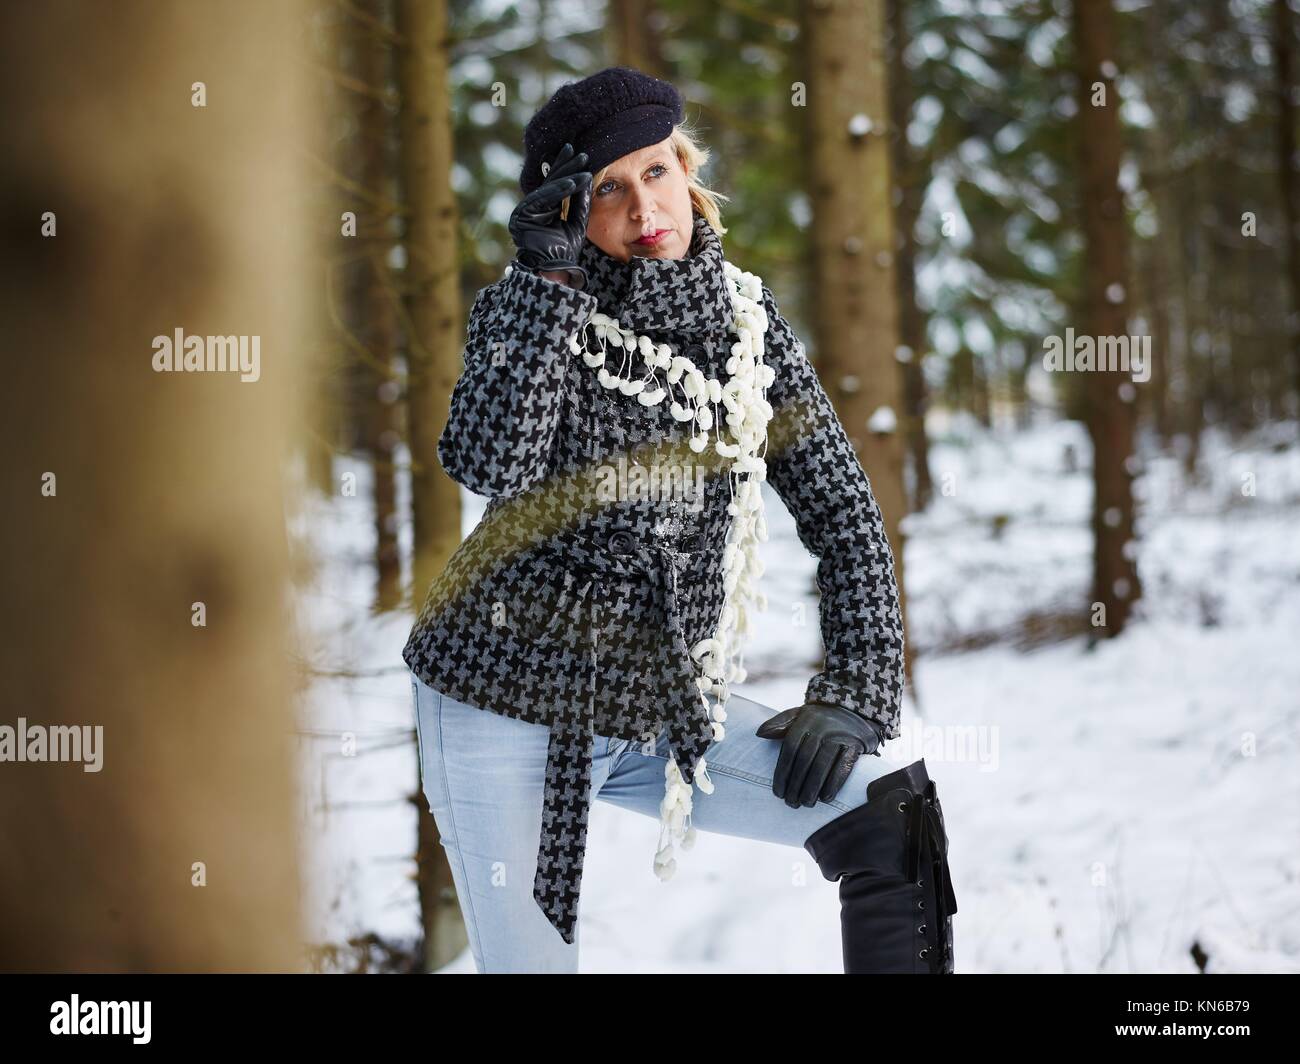 Fashionable mature adult woman wearing winter clothes, rural scene, forest on background. South Finland in January. Stock Photo